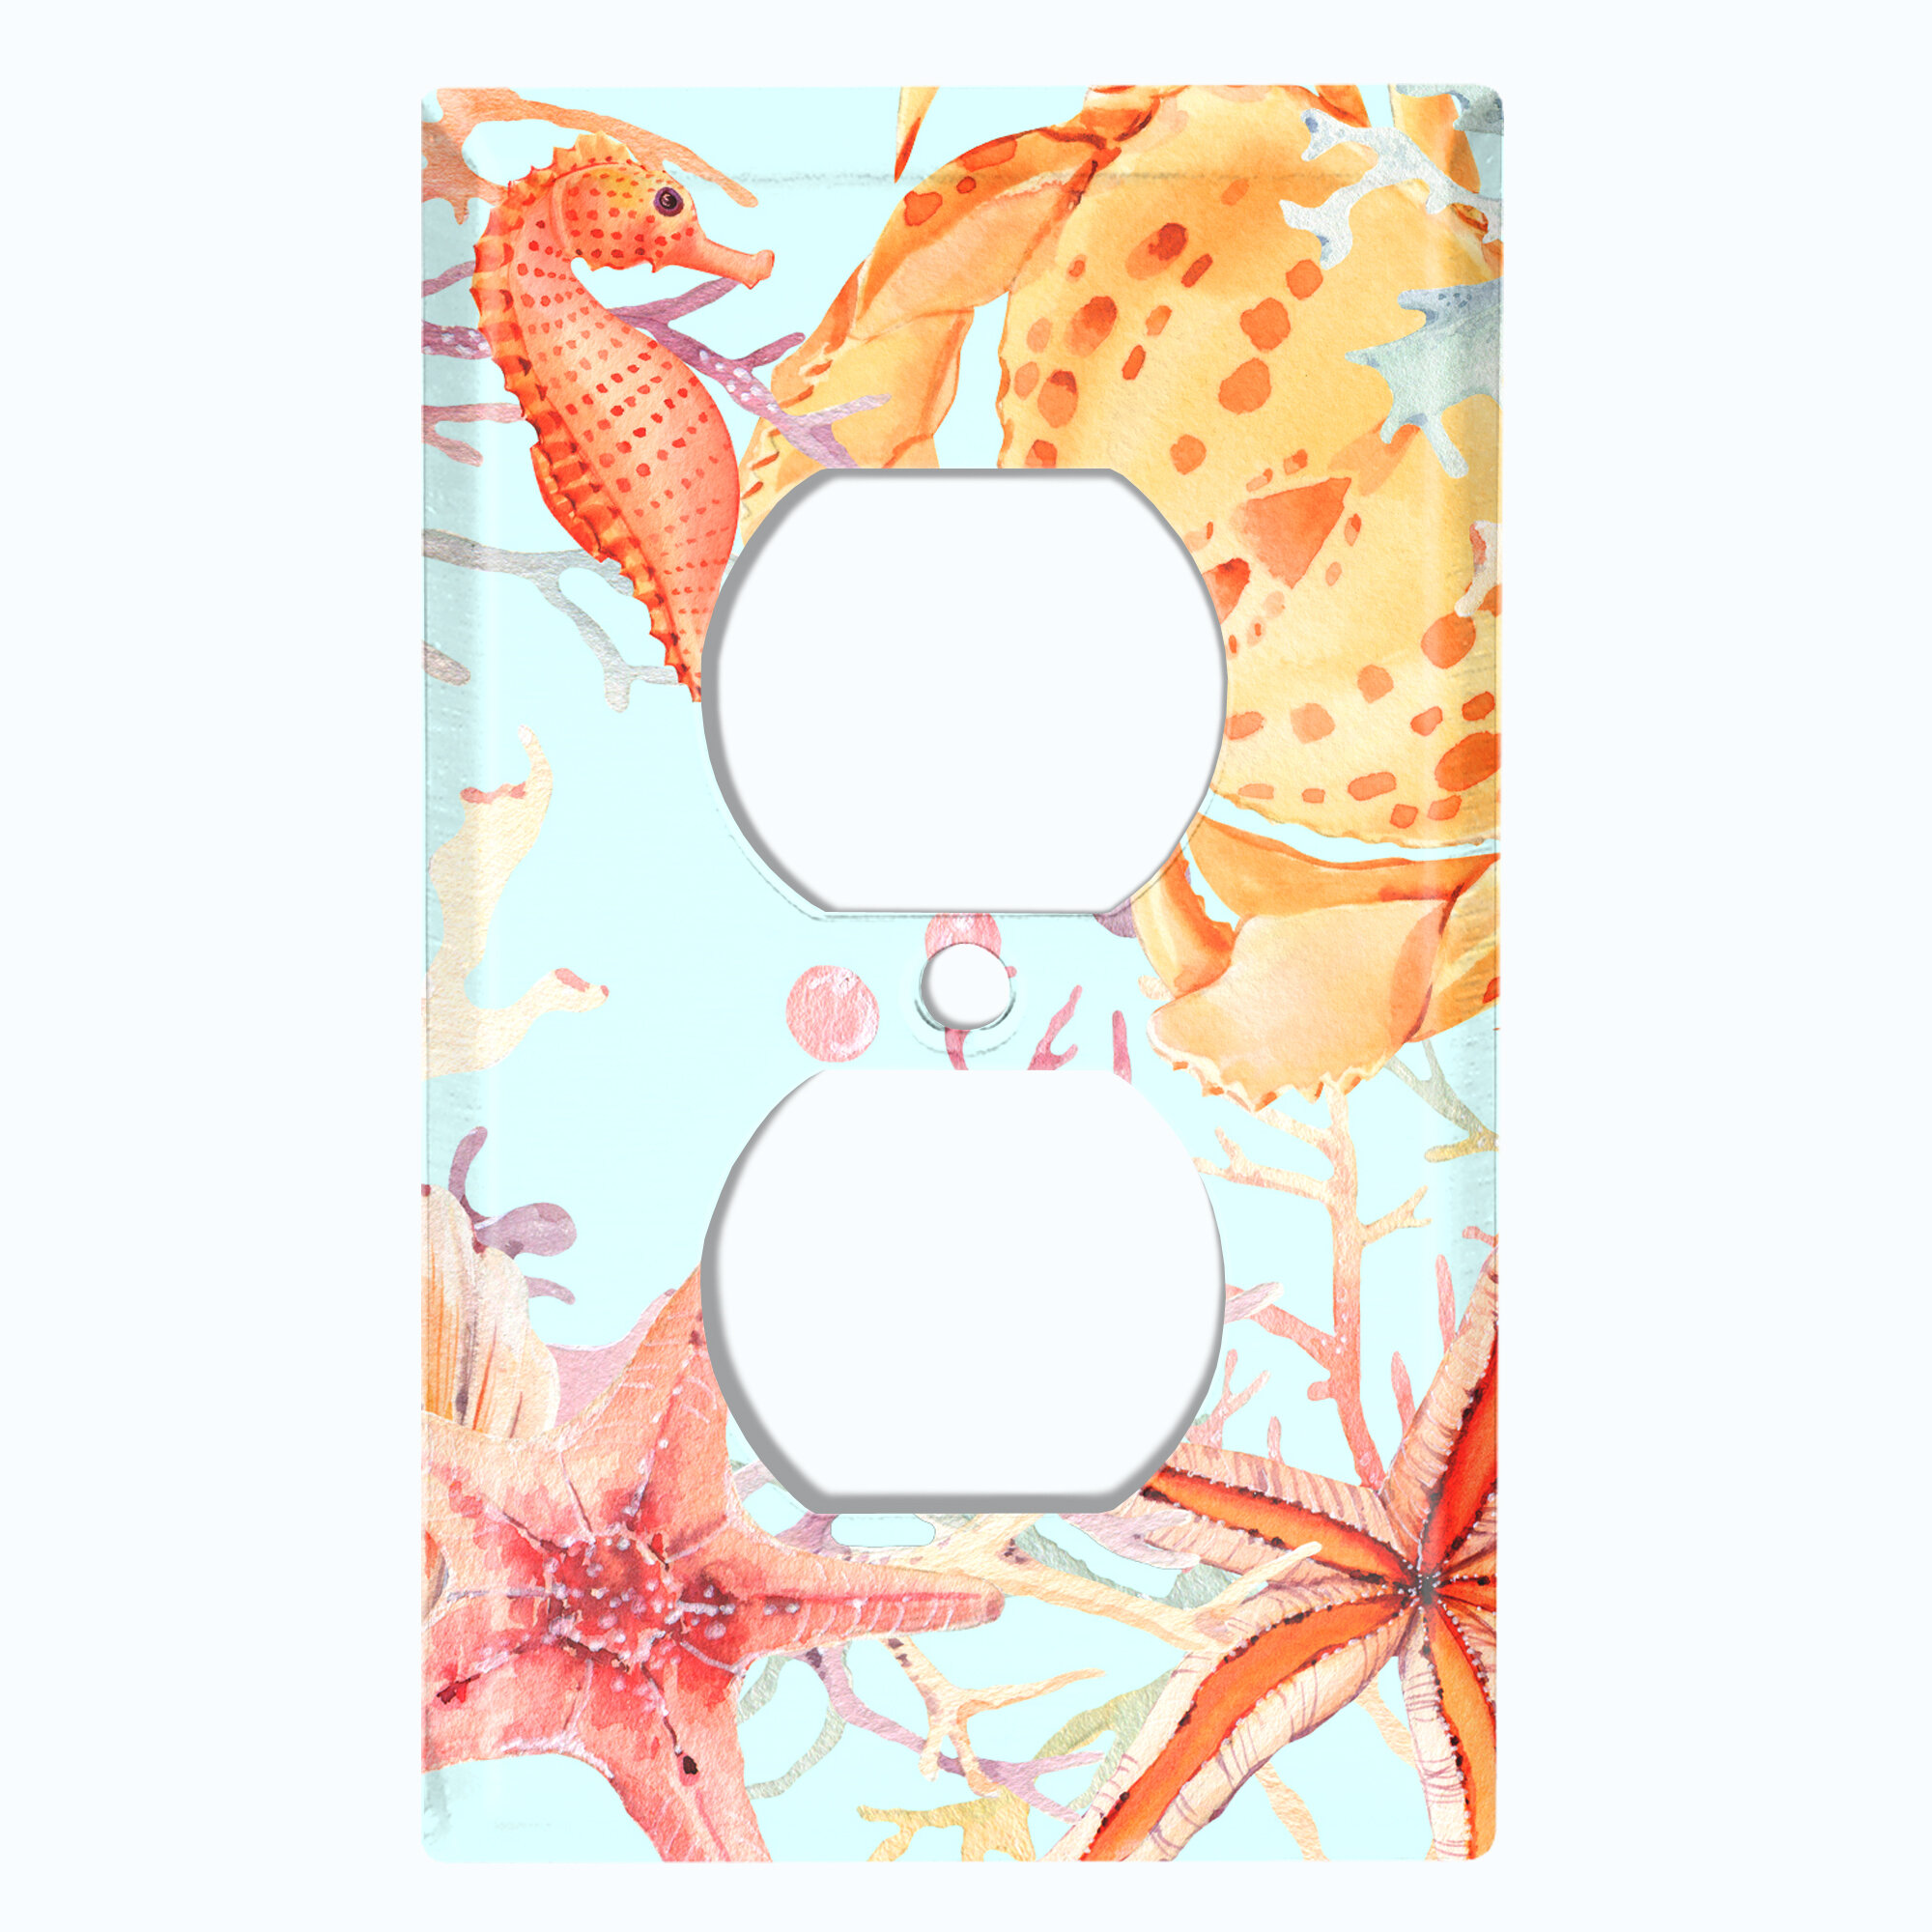 WorldAcc Metal Light Switch Plate Outlet Cover (Sea Horse Crab